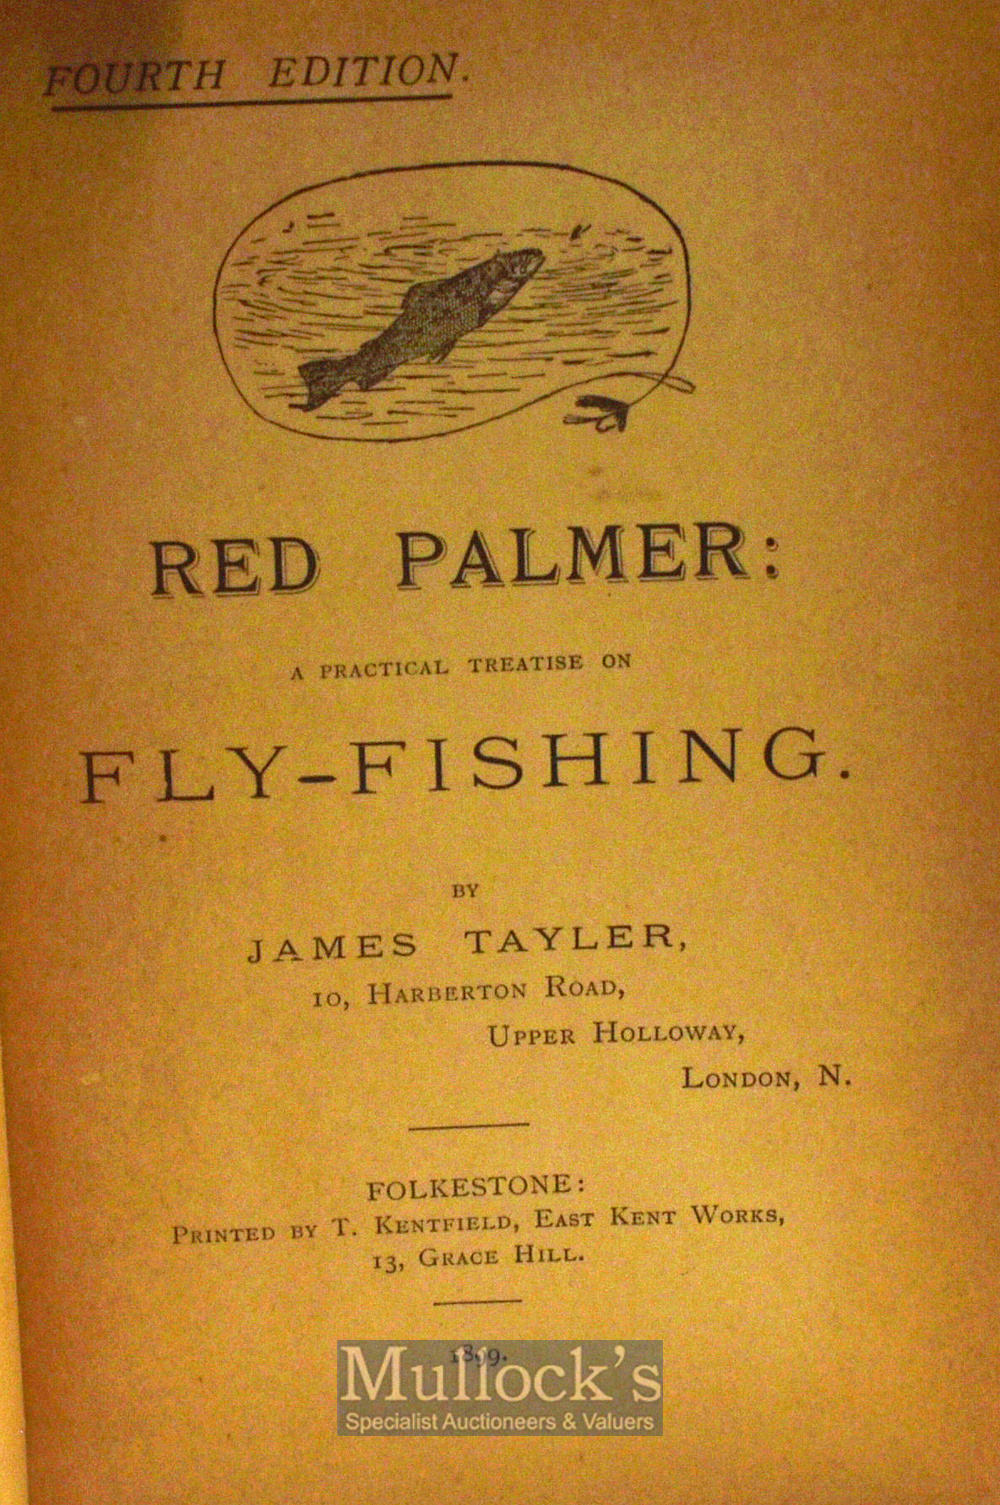 Hills, J W 'A History of Fly Fishing for Trout' London 1921 1st ed original cloth binding - Image 2 of 2